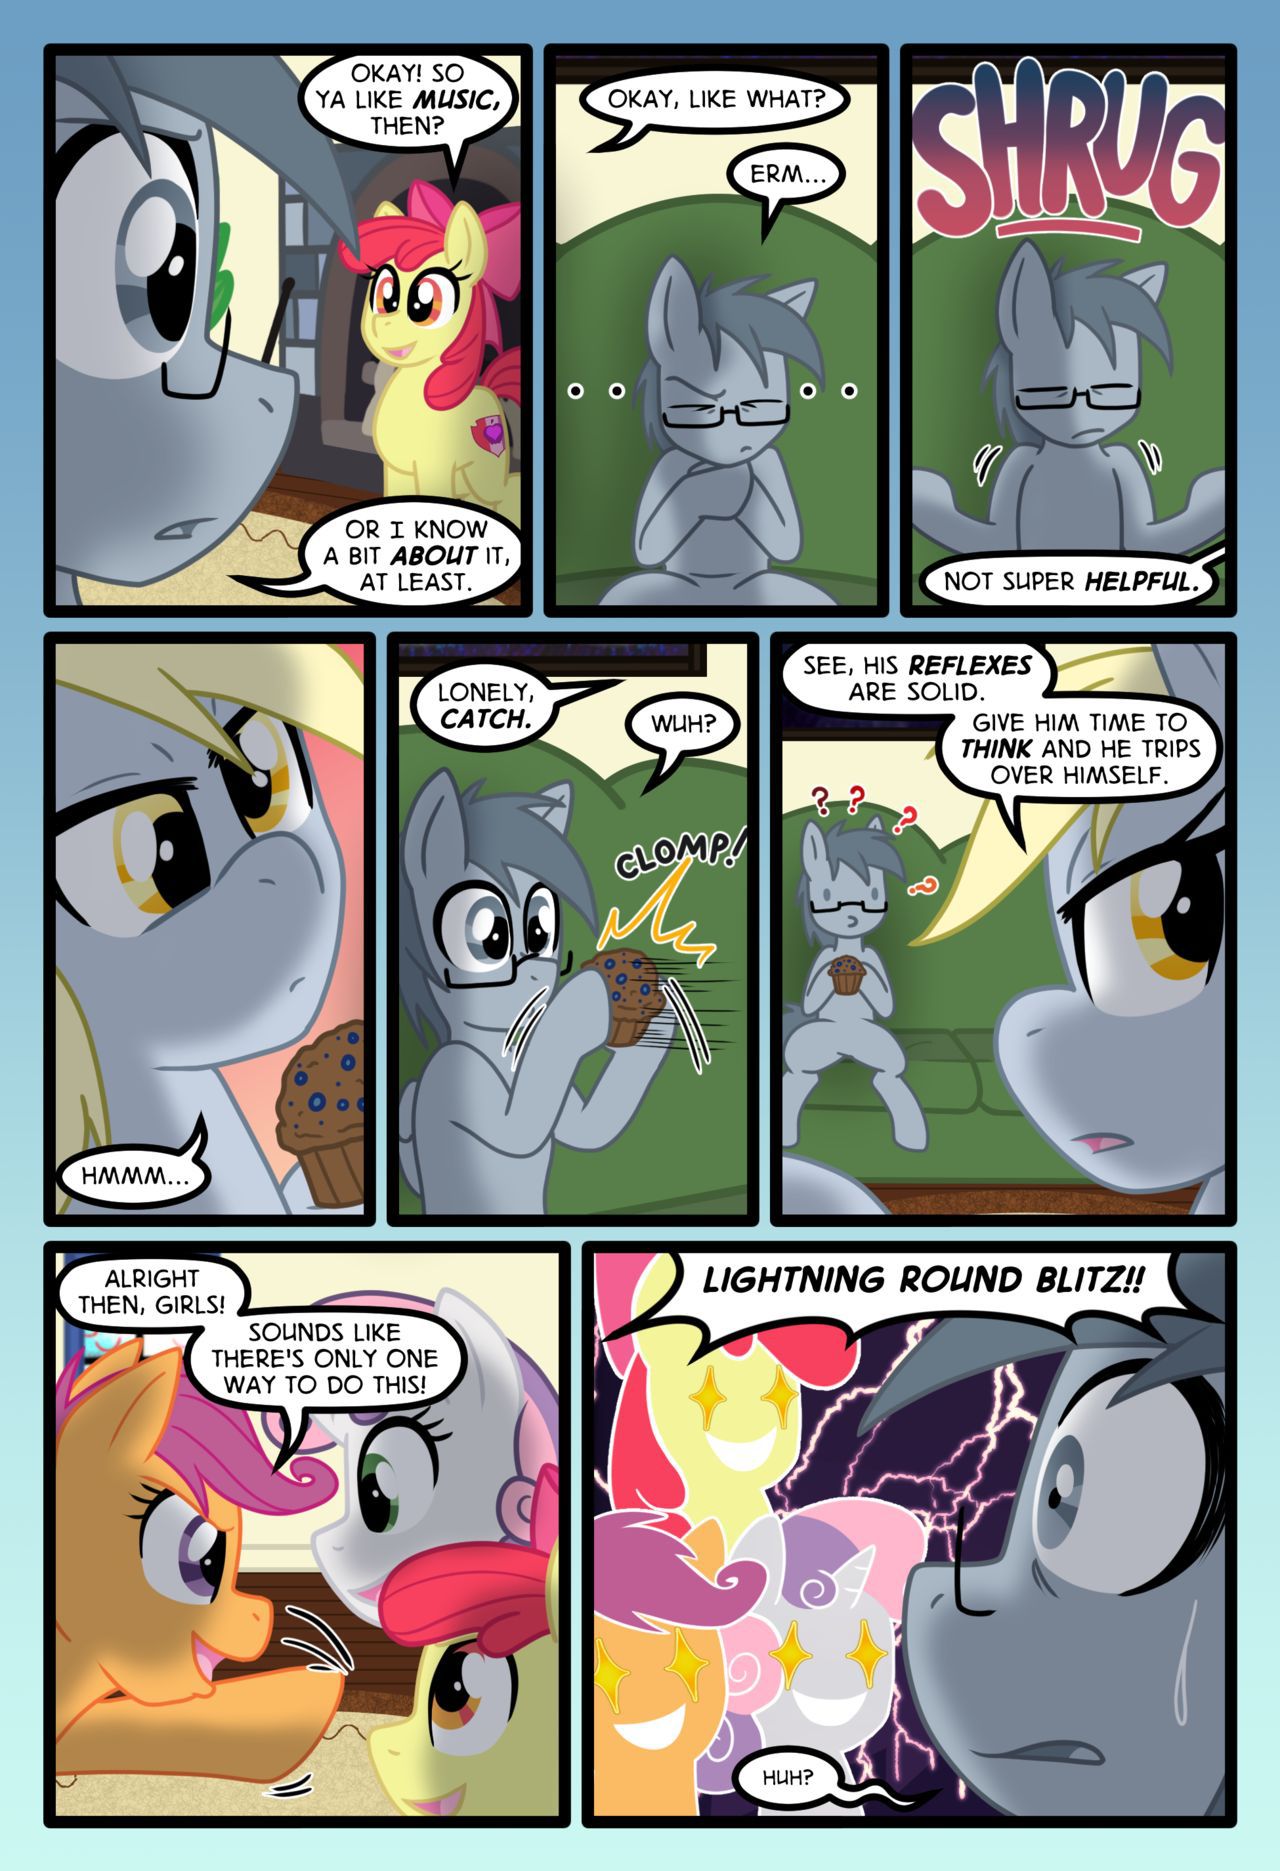 [Zaron] Lonely Hooves (My Little Pony Friendship Is Magic) [Ongoing] 211